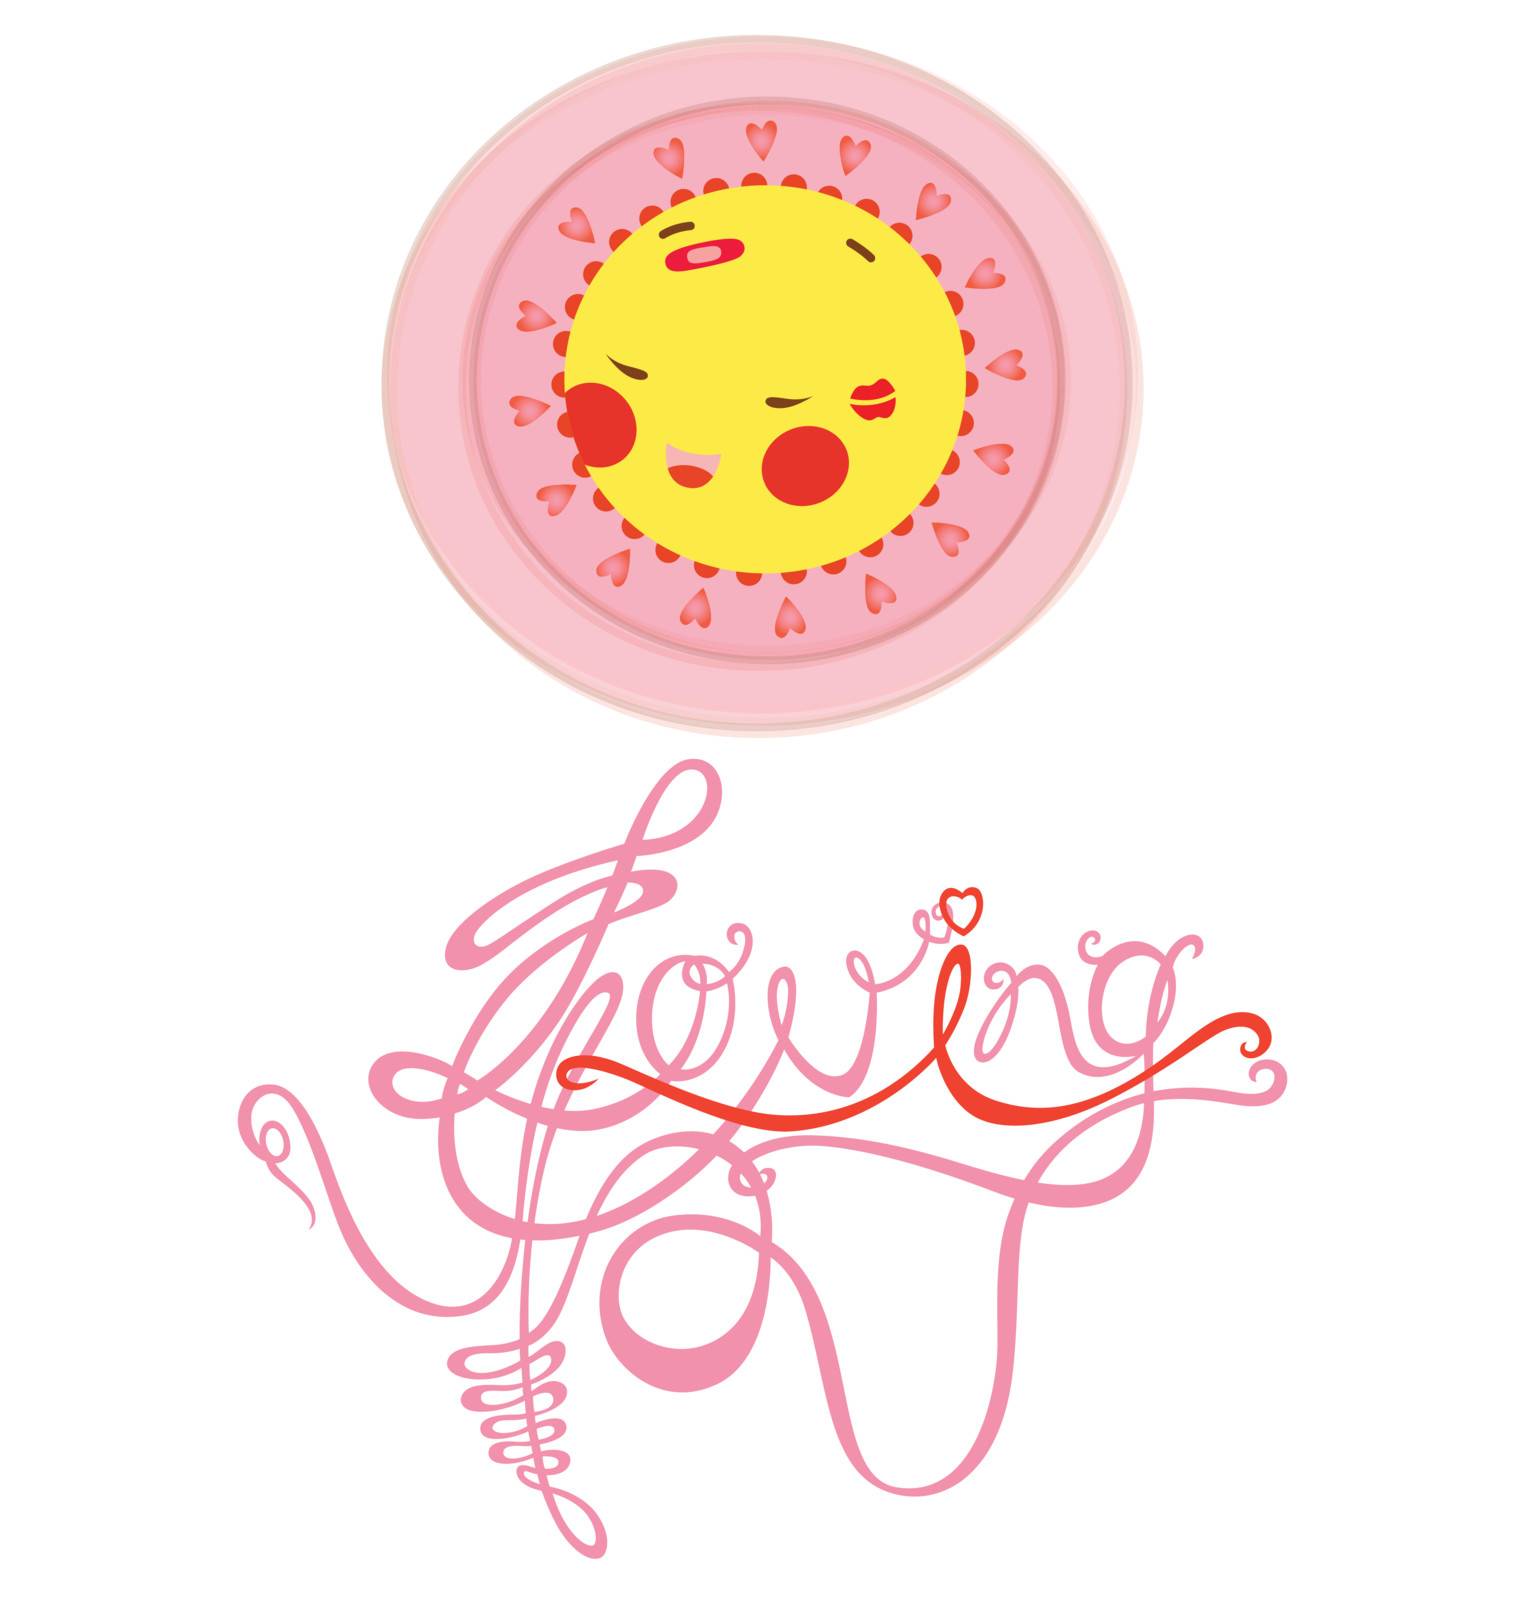 A sun character named ACE expressing his love with pink color and a quote "Loving You".